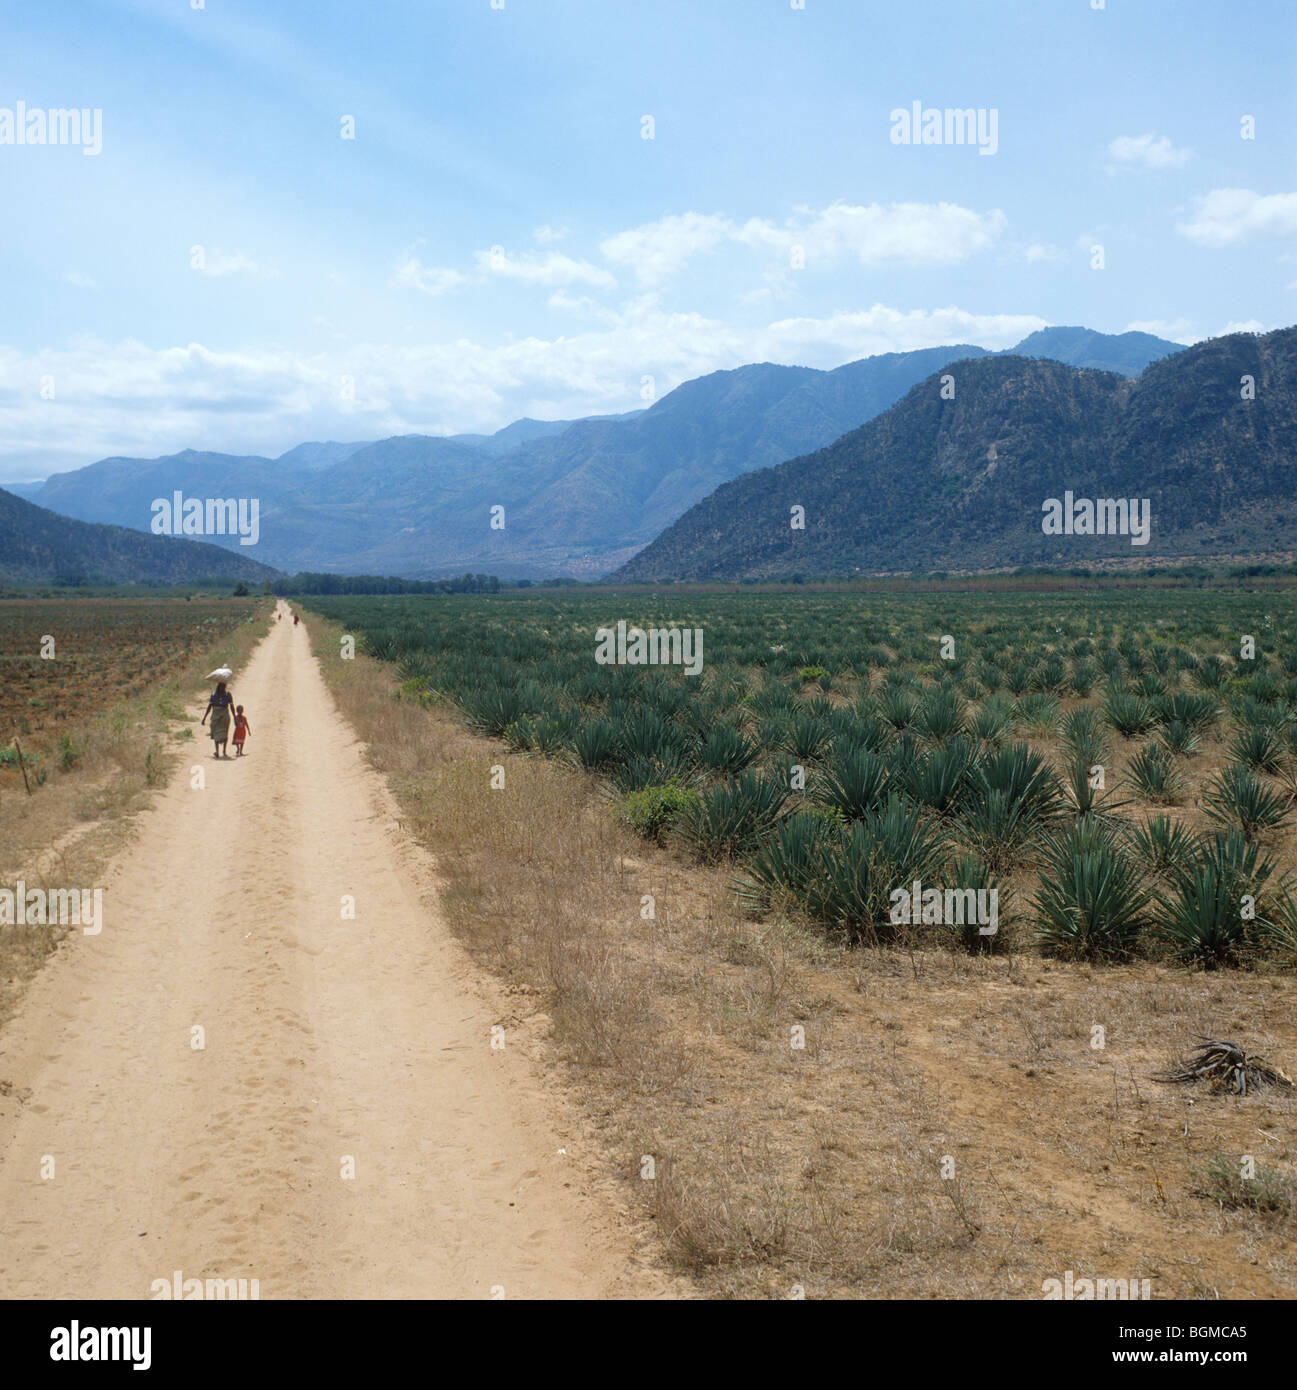 View of extensive young sisal plantation with people walking on dust road, Tanzania Stock Photo